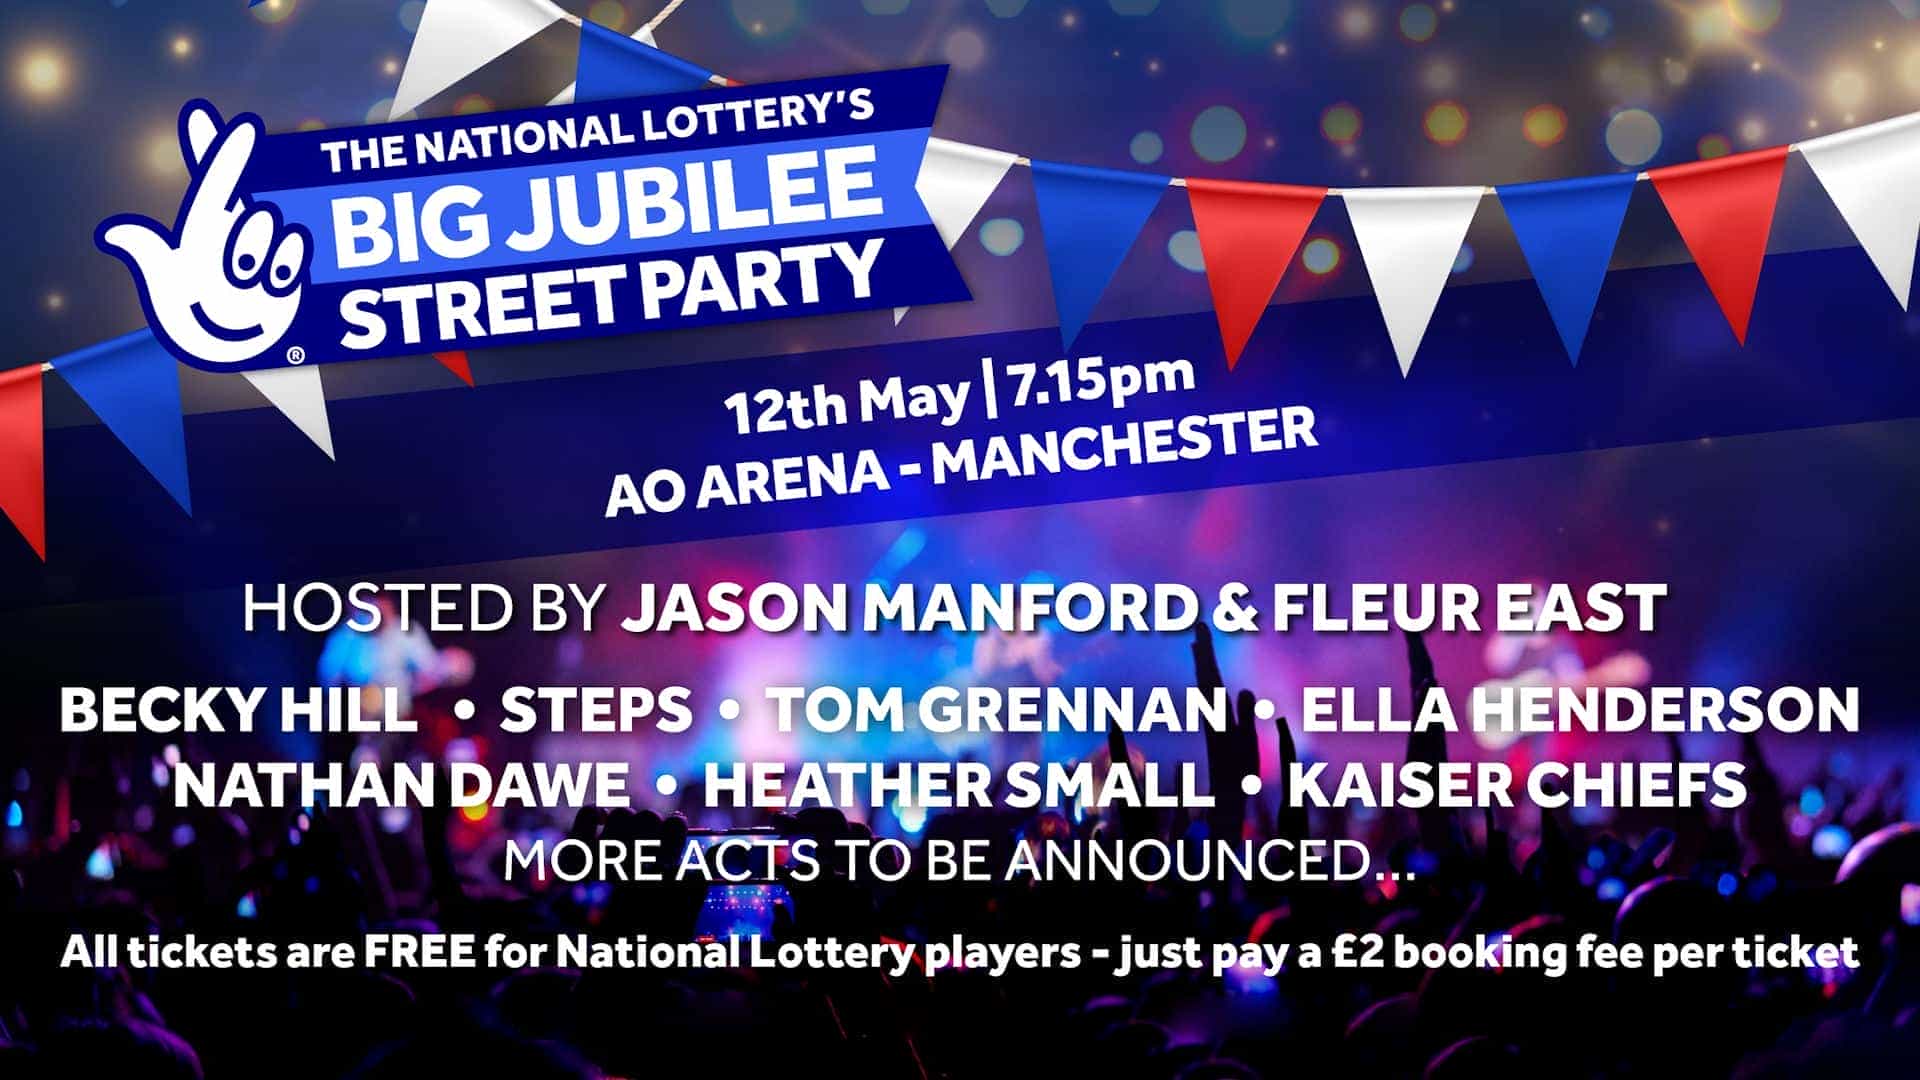 The National Lottery's Big Jubilee Street Party